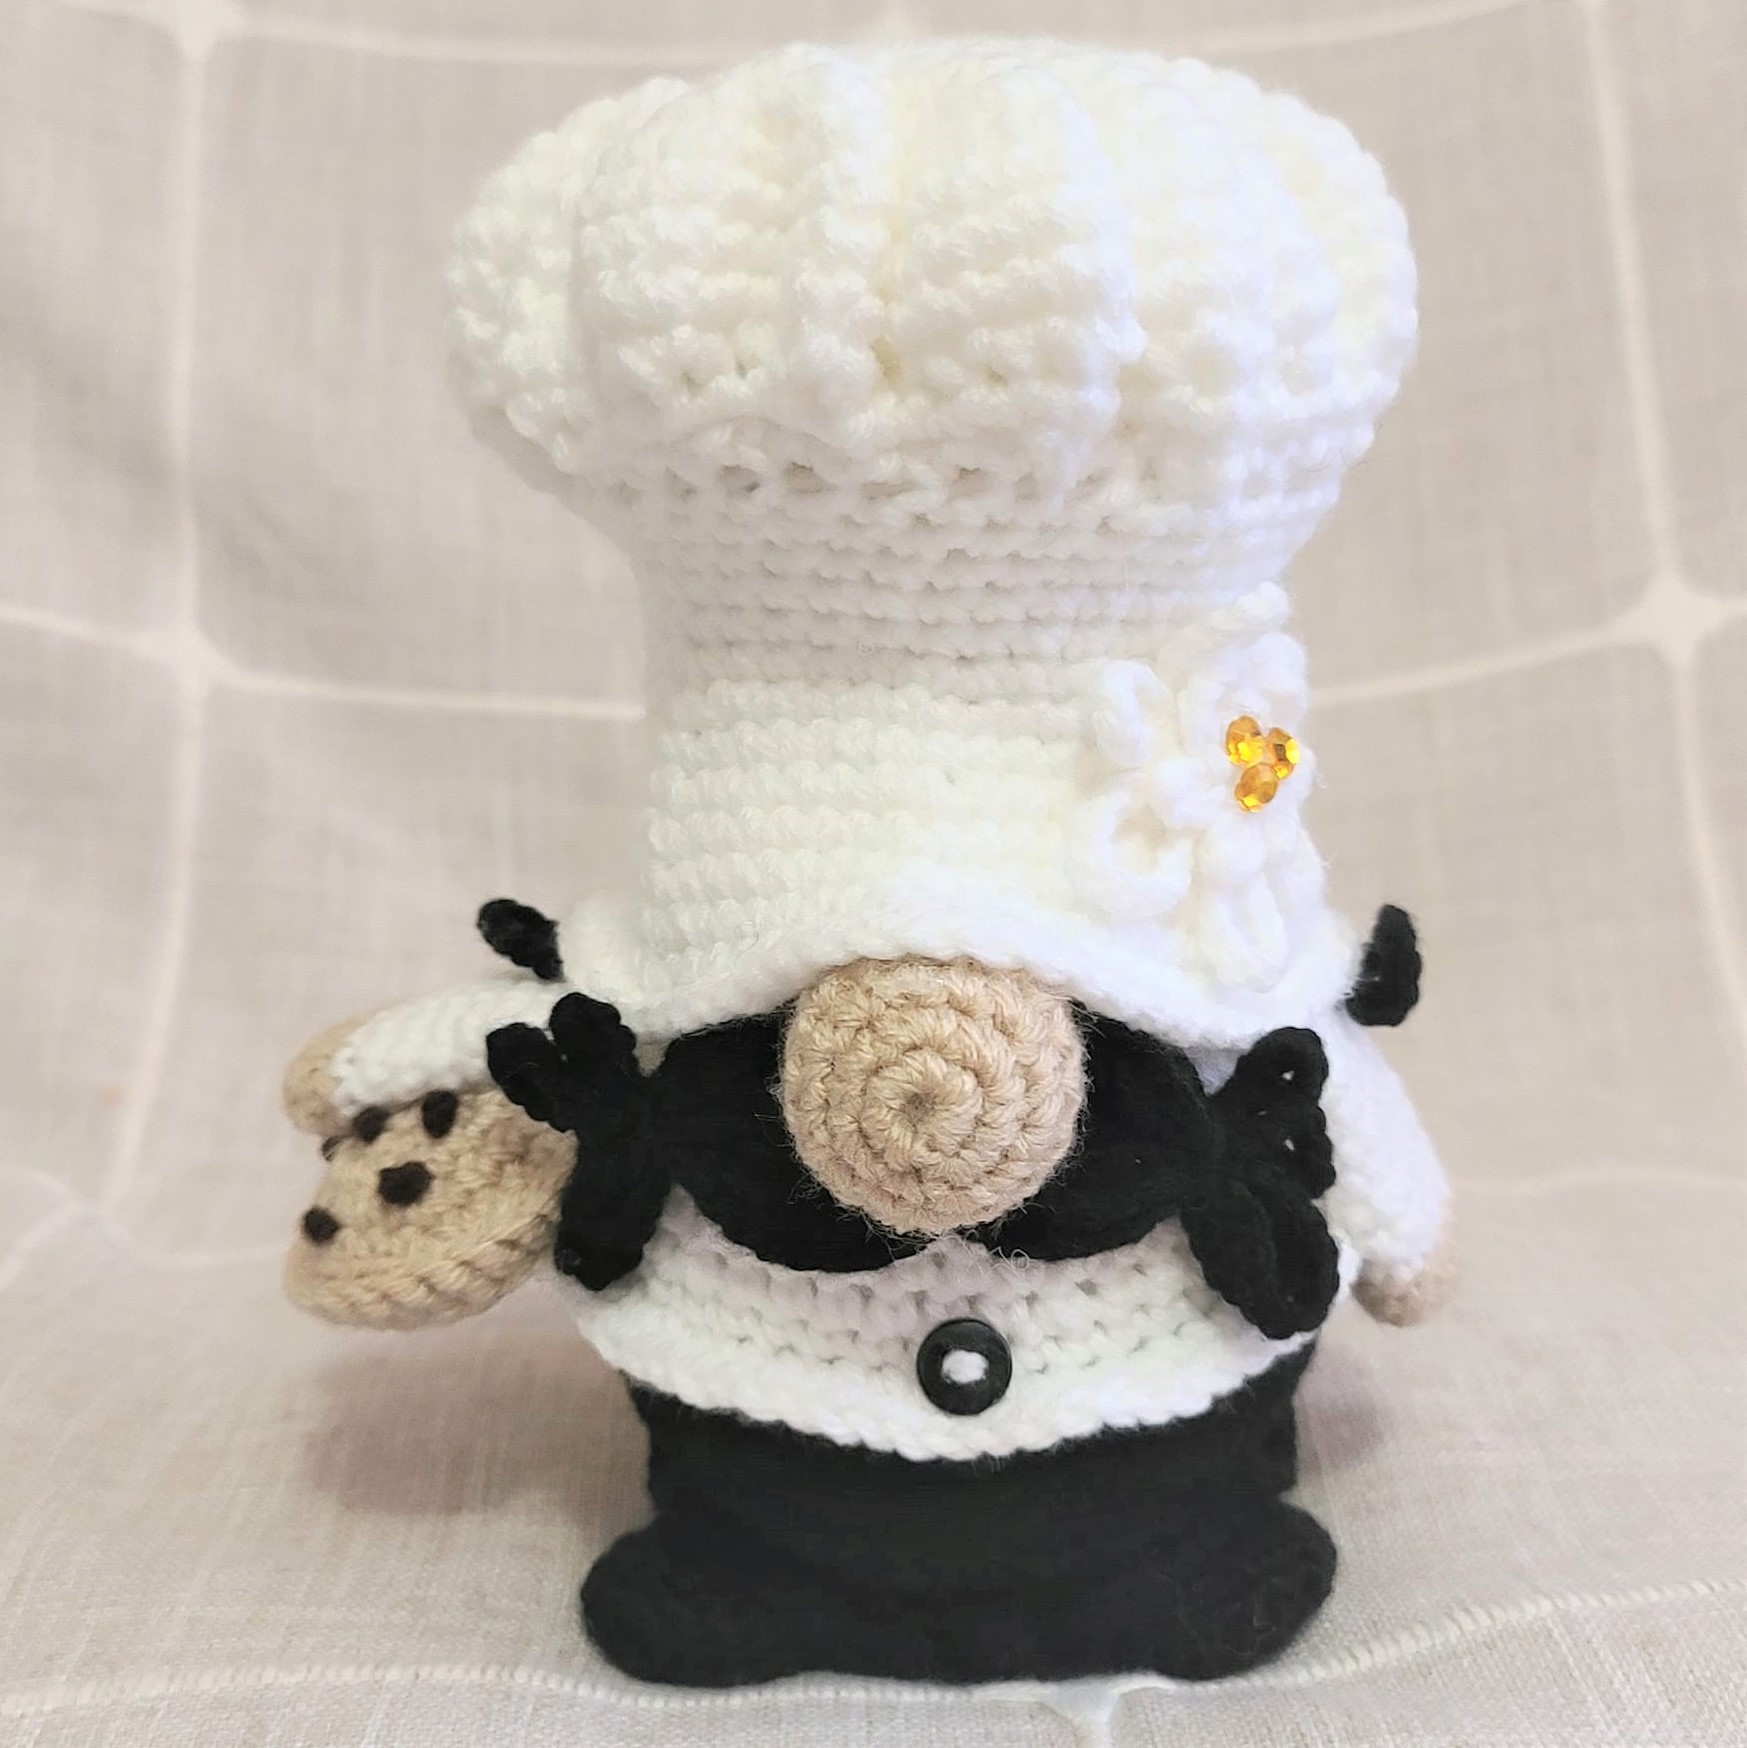 Crochet Chef Gnome with a cookie